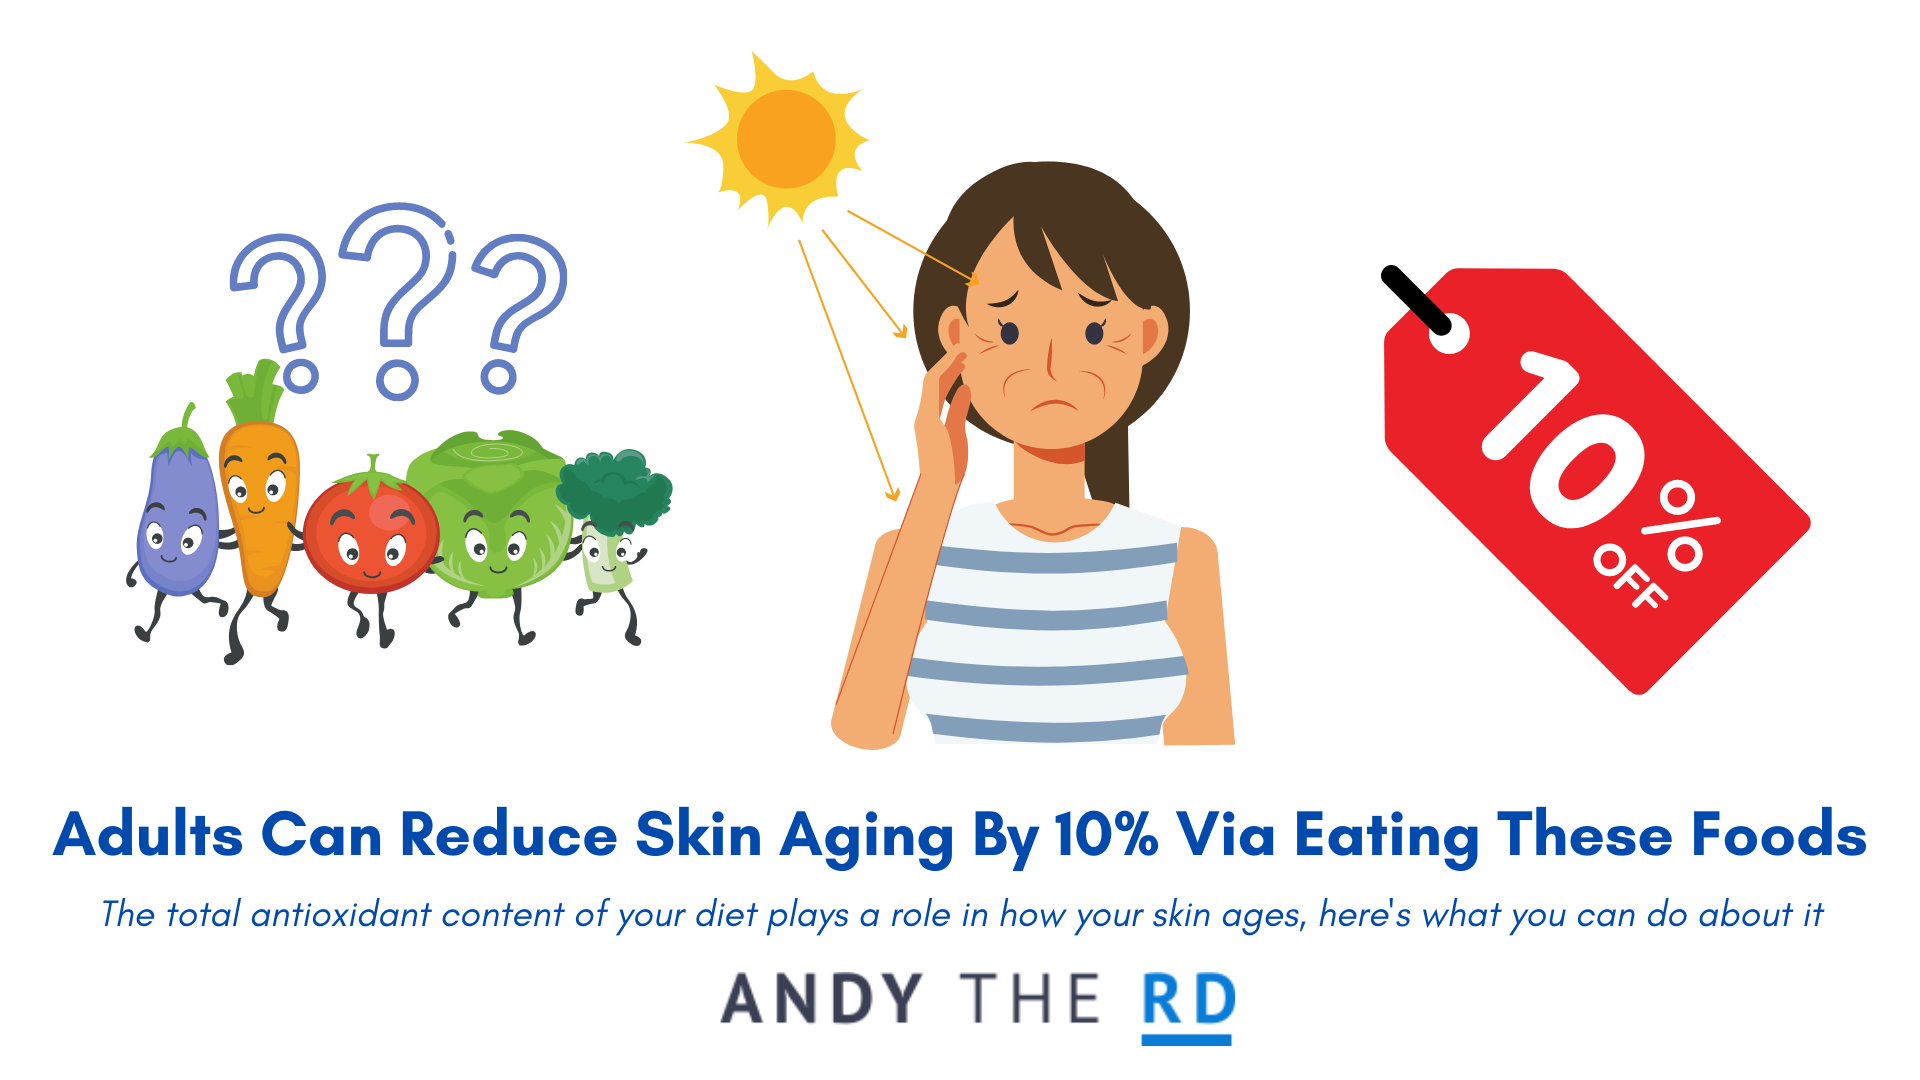 Eat These Foods To Reduce Skin Aging By 10%